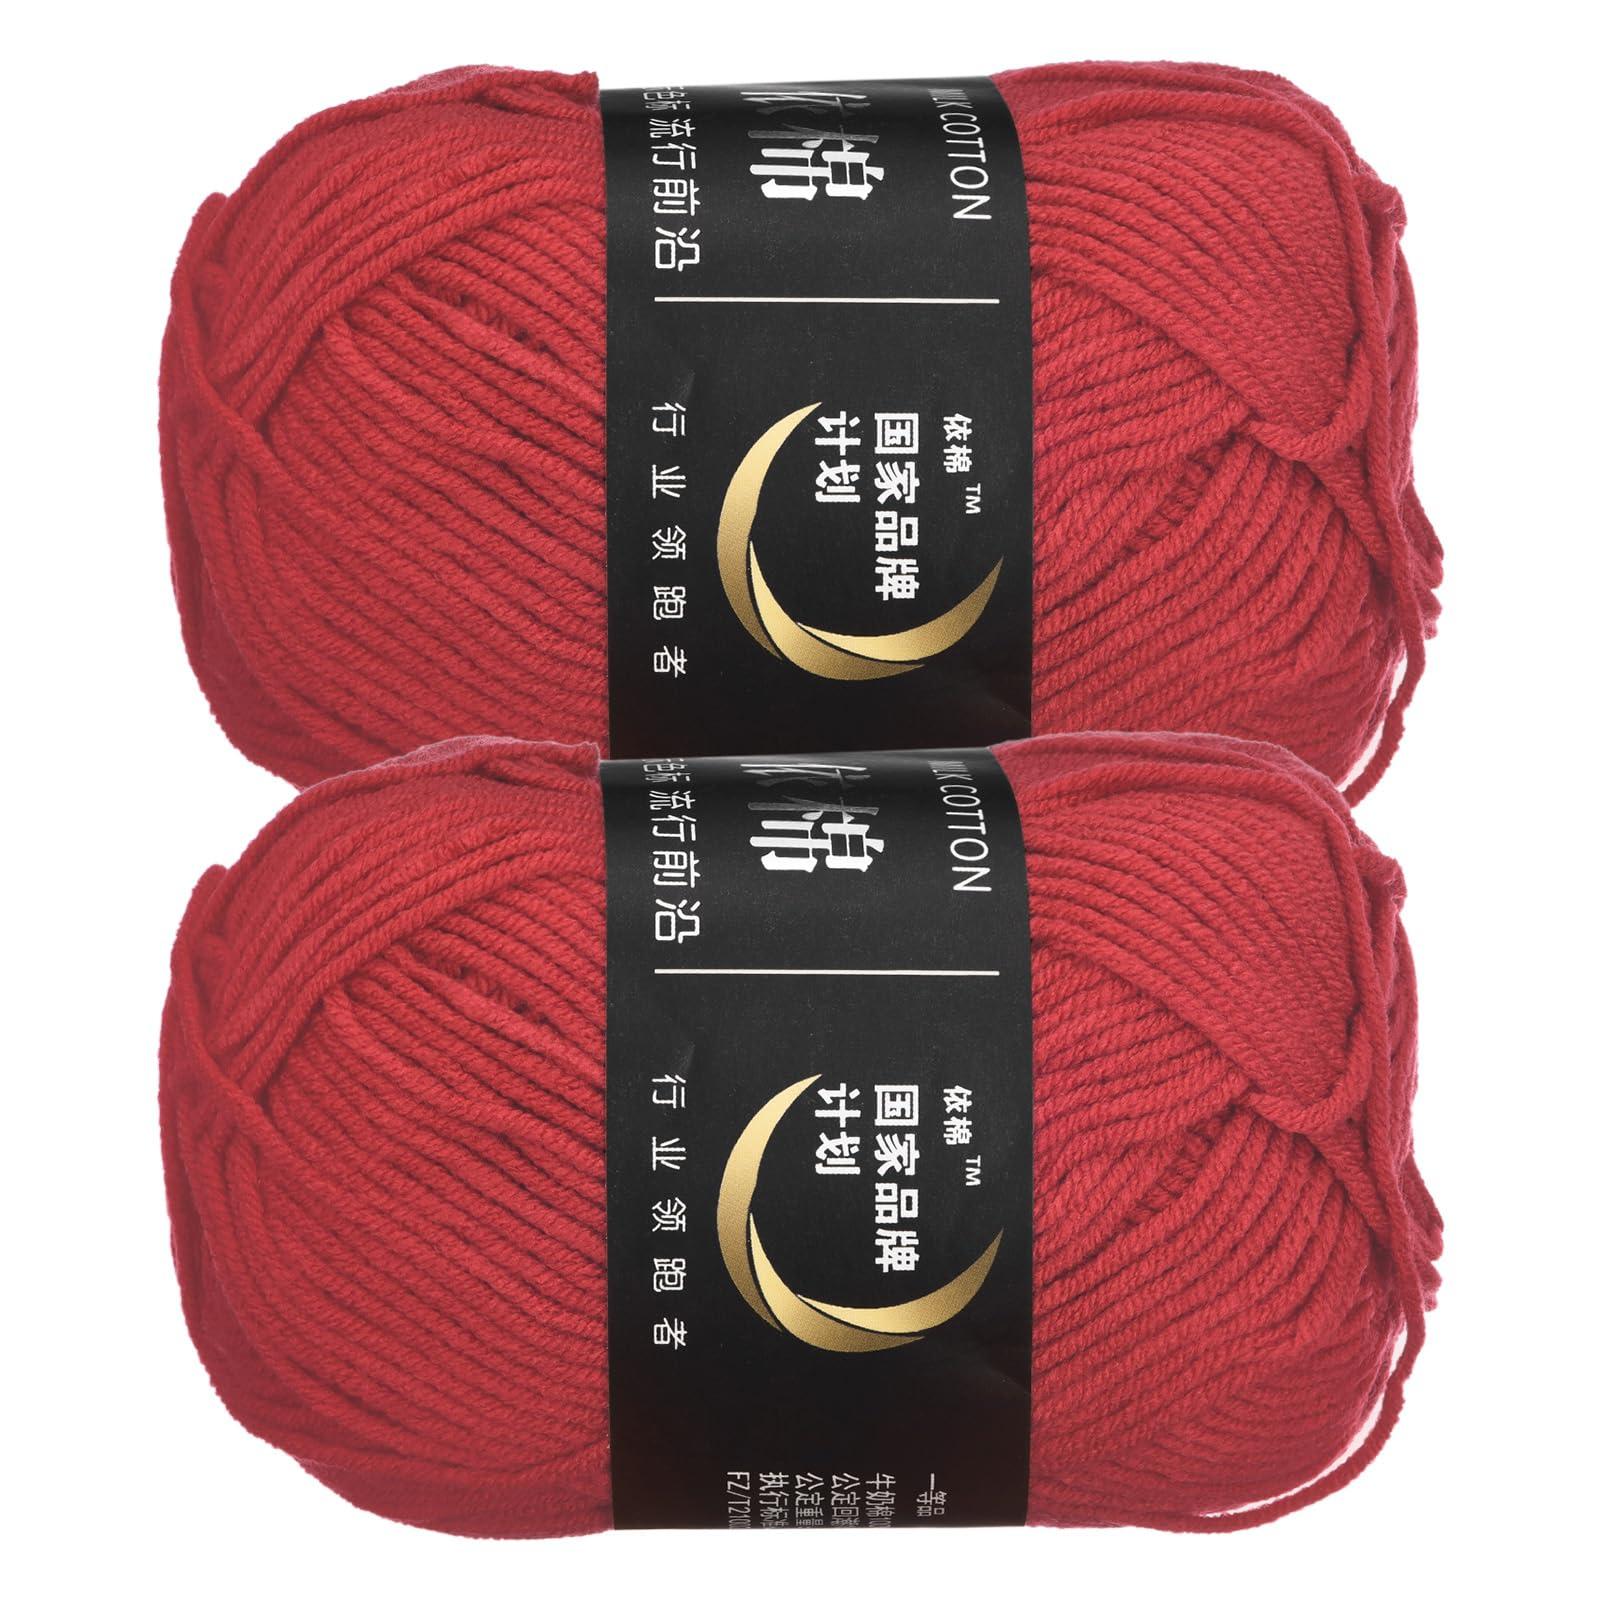 sourcing map Acrylic Yarn Skeins, 2 Pack of 50g/1.76oz Soft Crochet Yarns for Knitting and Crocheting Craft Project, Light Carmine